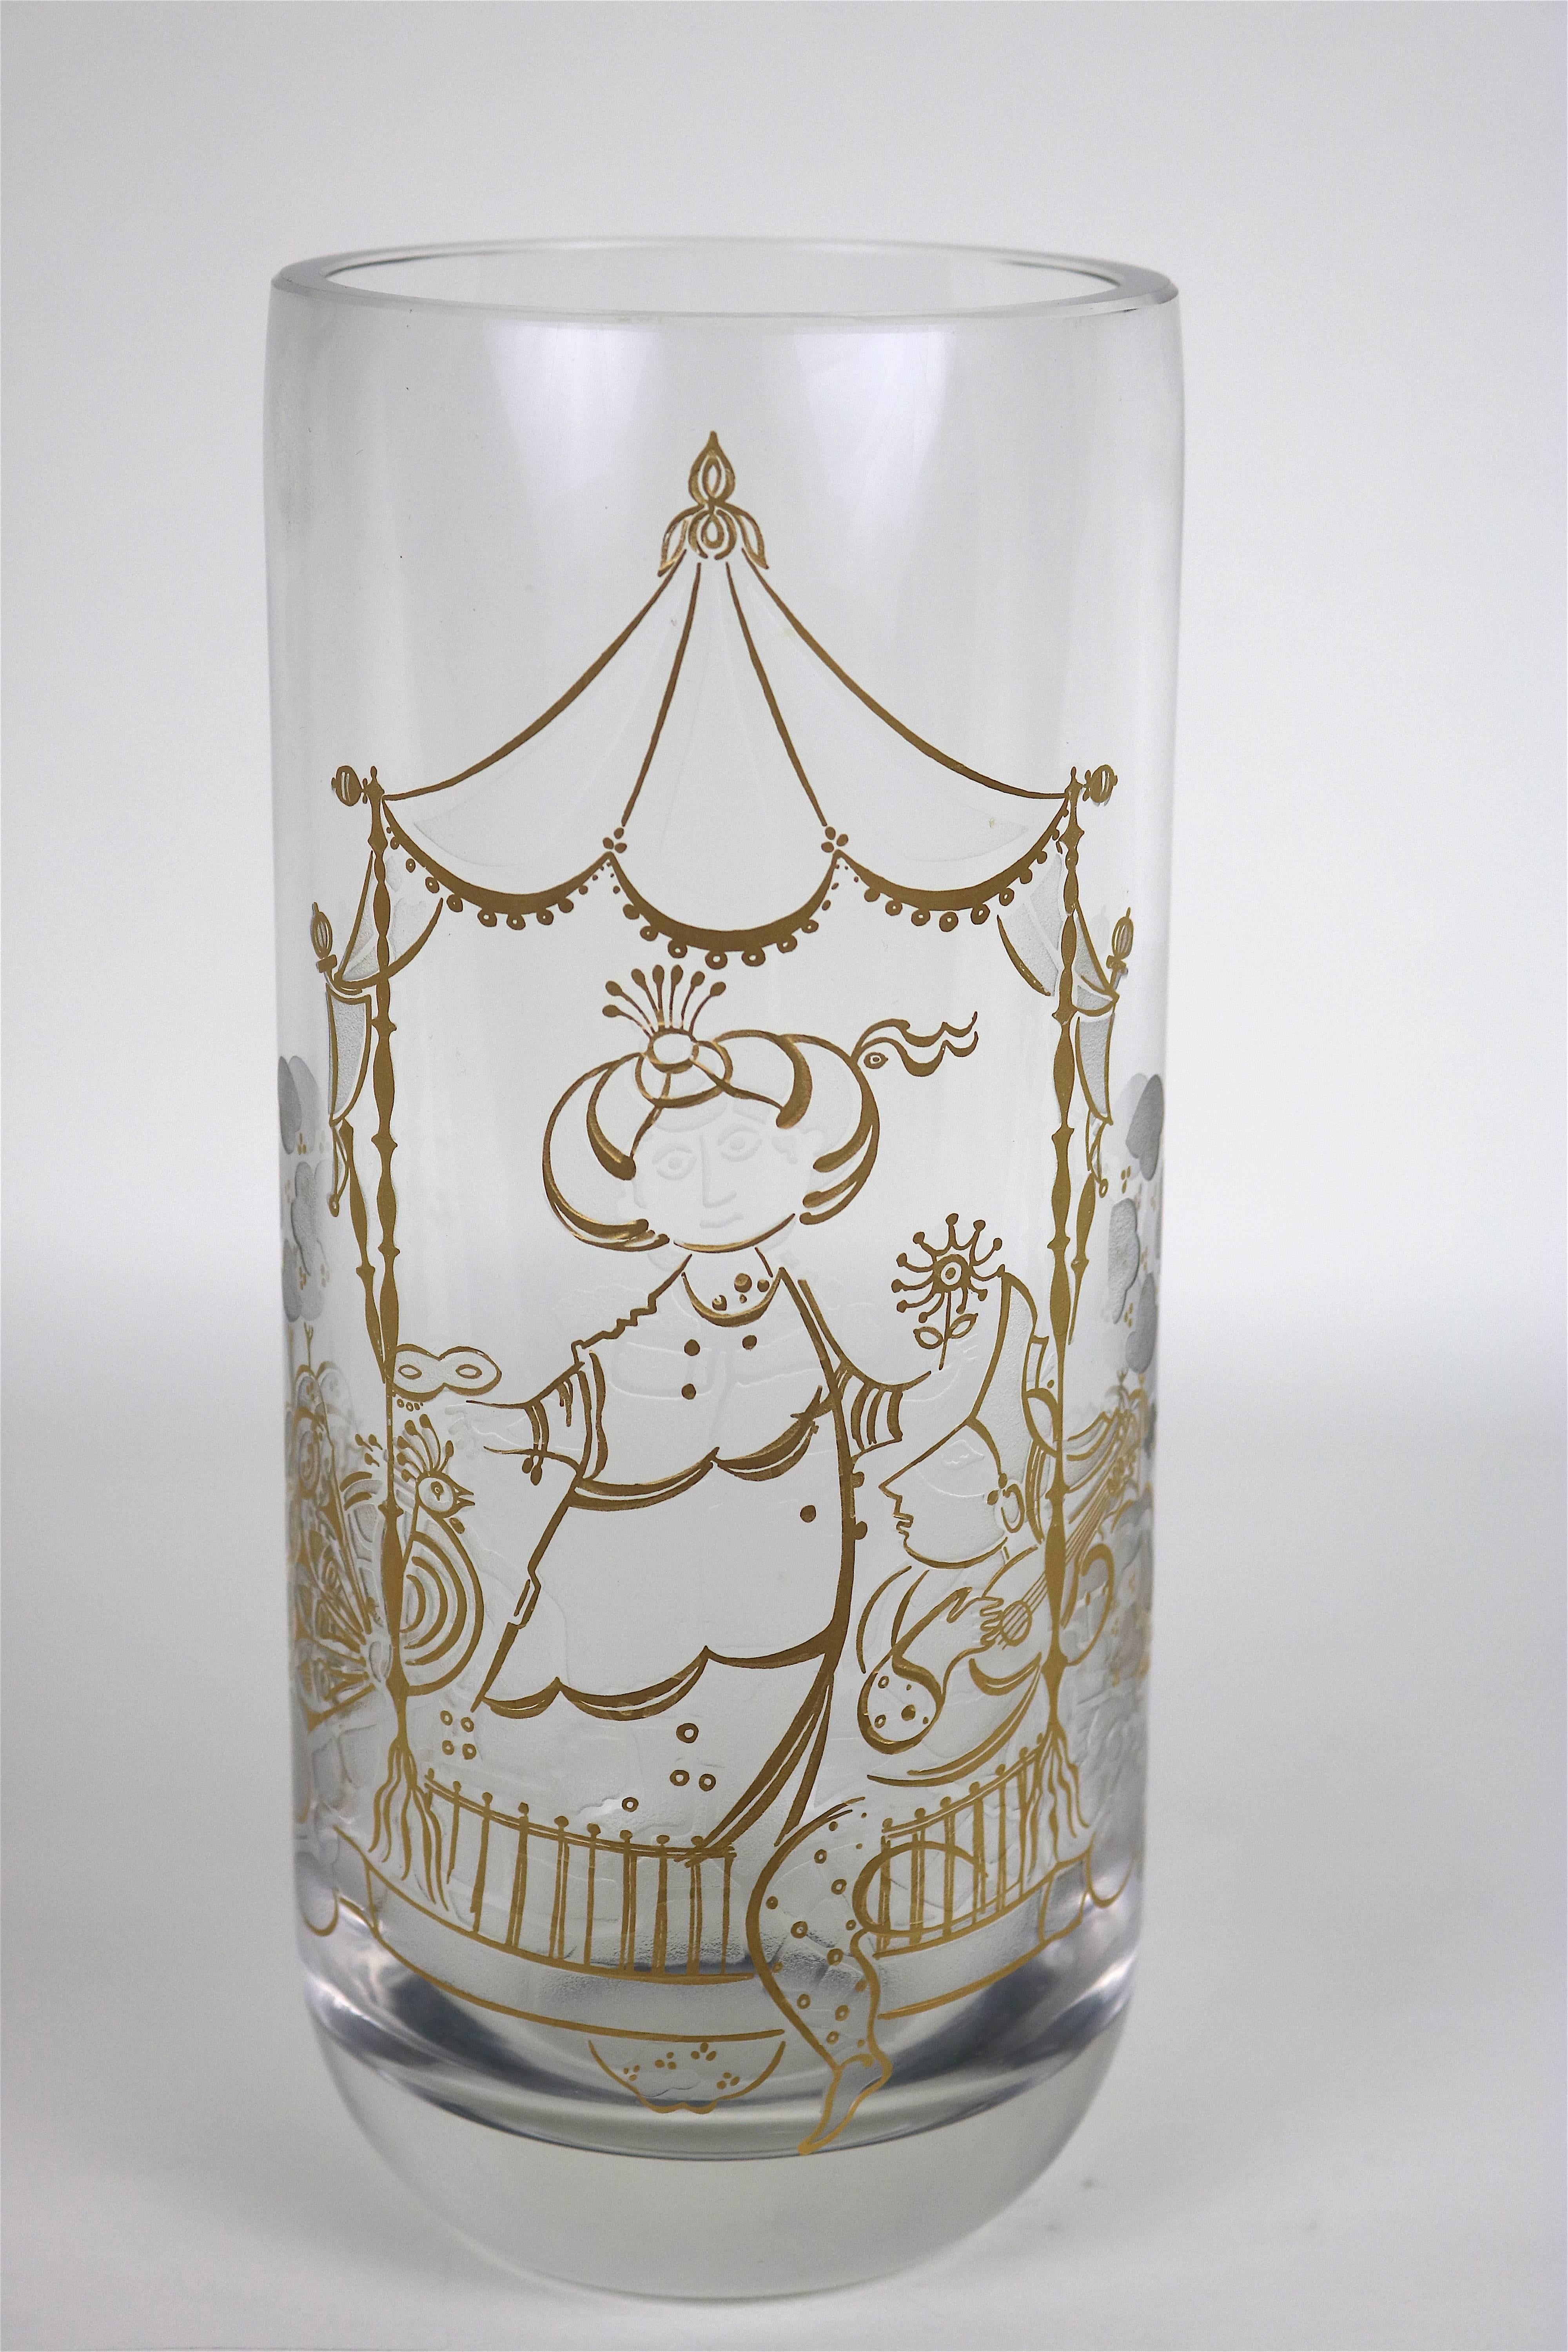 Bjorn Wiinblad Rosenthal Crystal Vase 22K Etched Gold Commedia Dell'Arte, Signed In Good Condition For Sale In West Palm Beach, FL